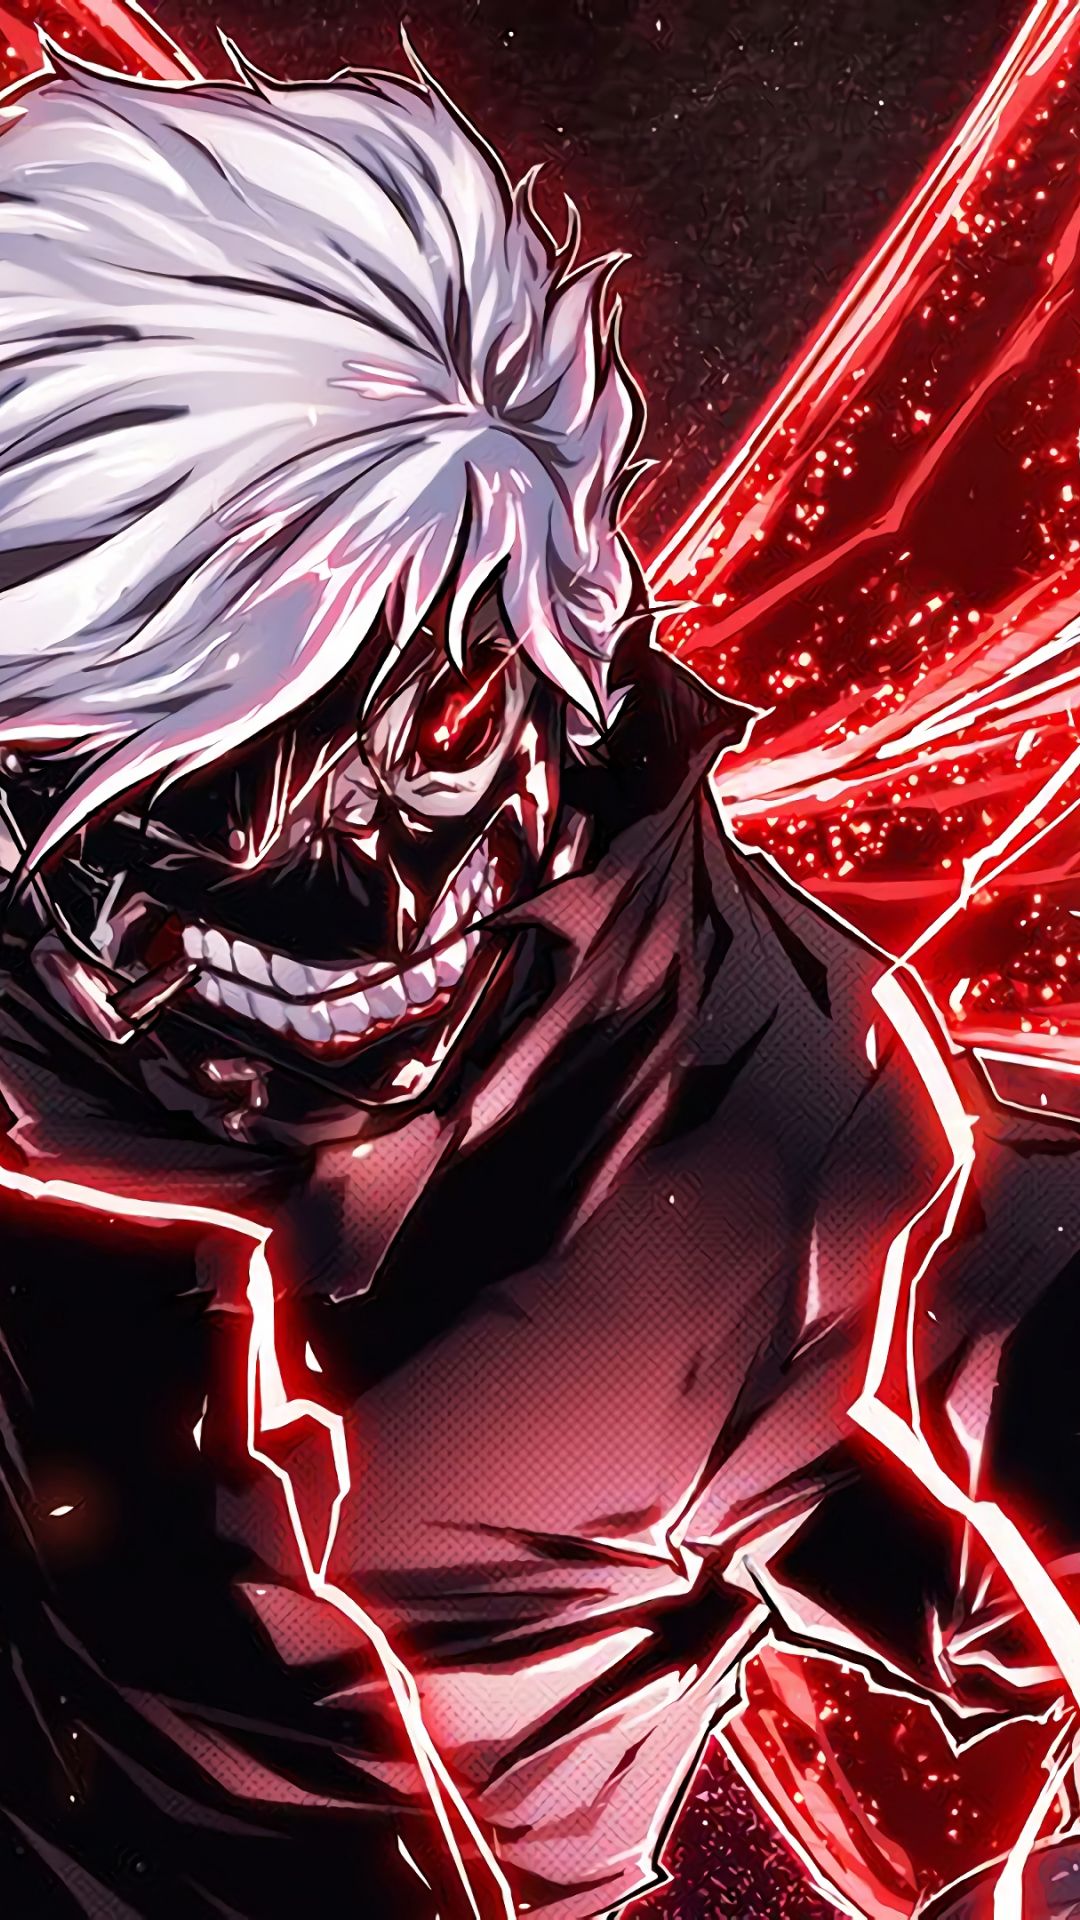 Free download Tokyo Ghoul 4k Ultra HD Wallpaper Background Image 3840x2160 [3840x2160] for your Desktop, Mobile & Tablet. Explore Tokyo Ghoul 4K Wallpaper. Tokyo Ghoul 4K Wallpaper, Tokyo Ghoul